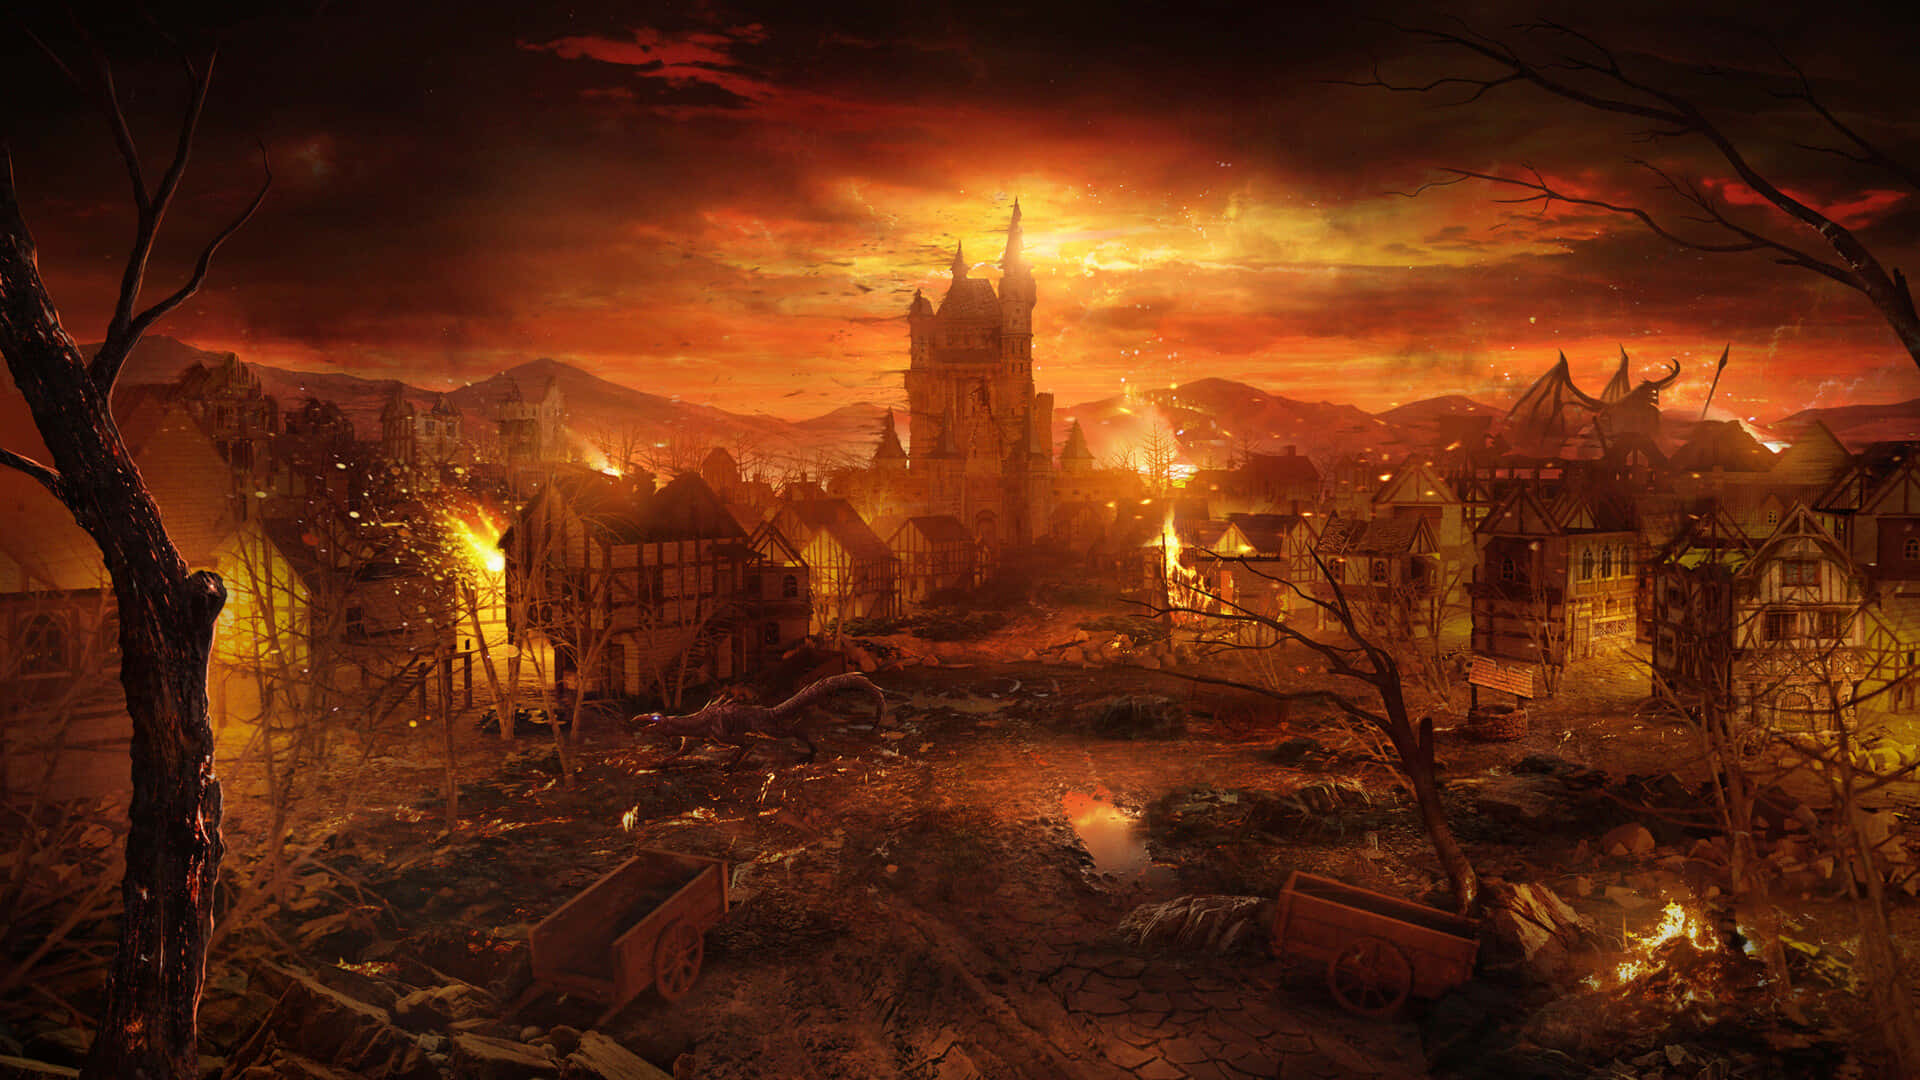 hell background images